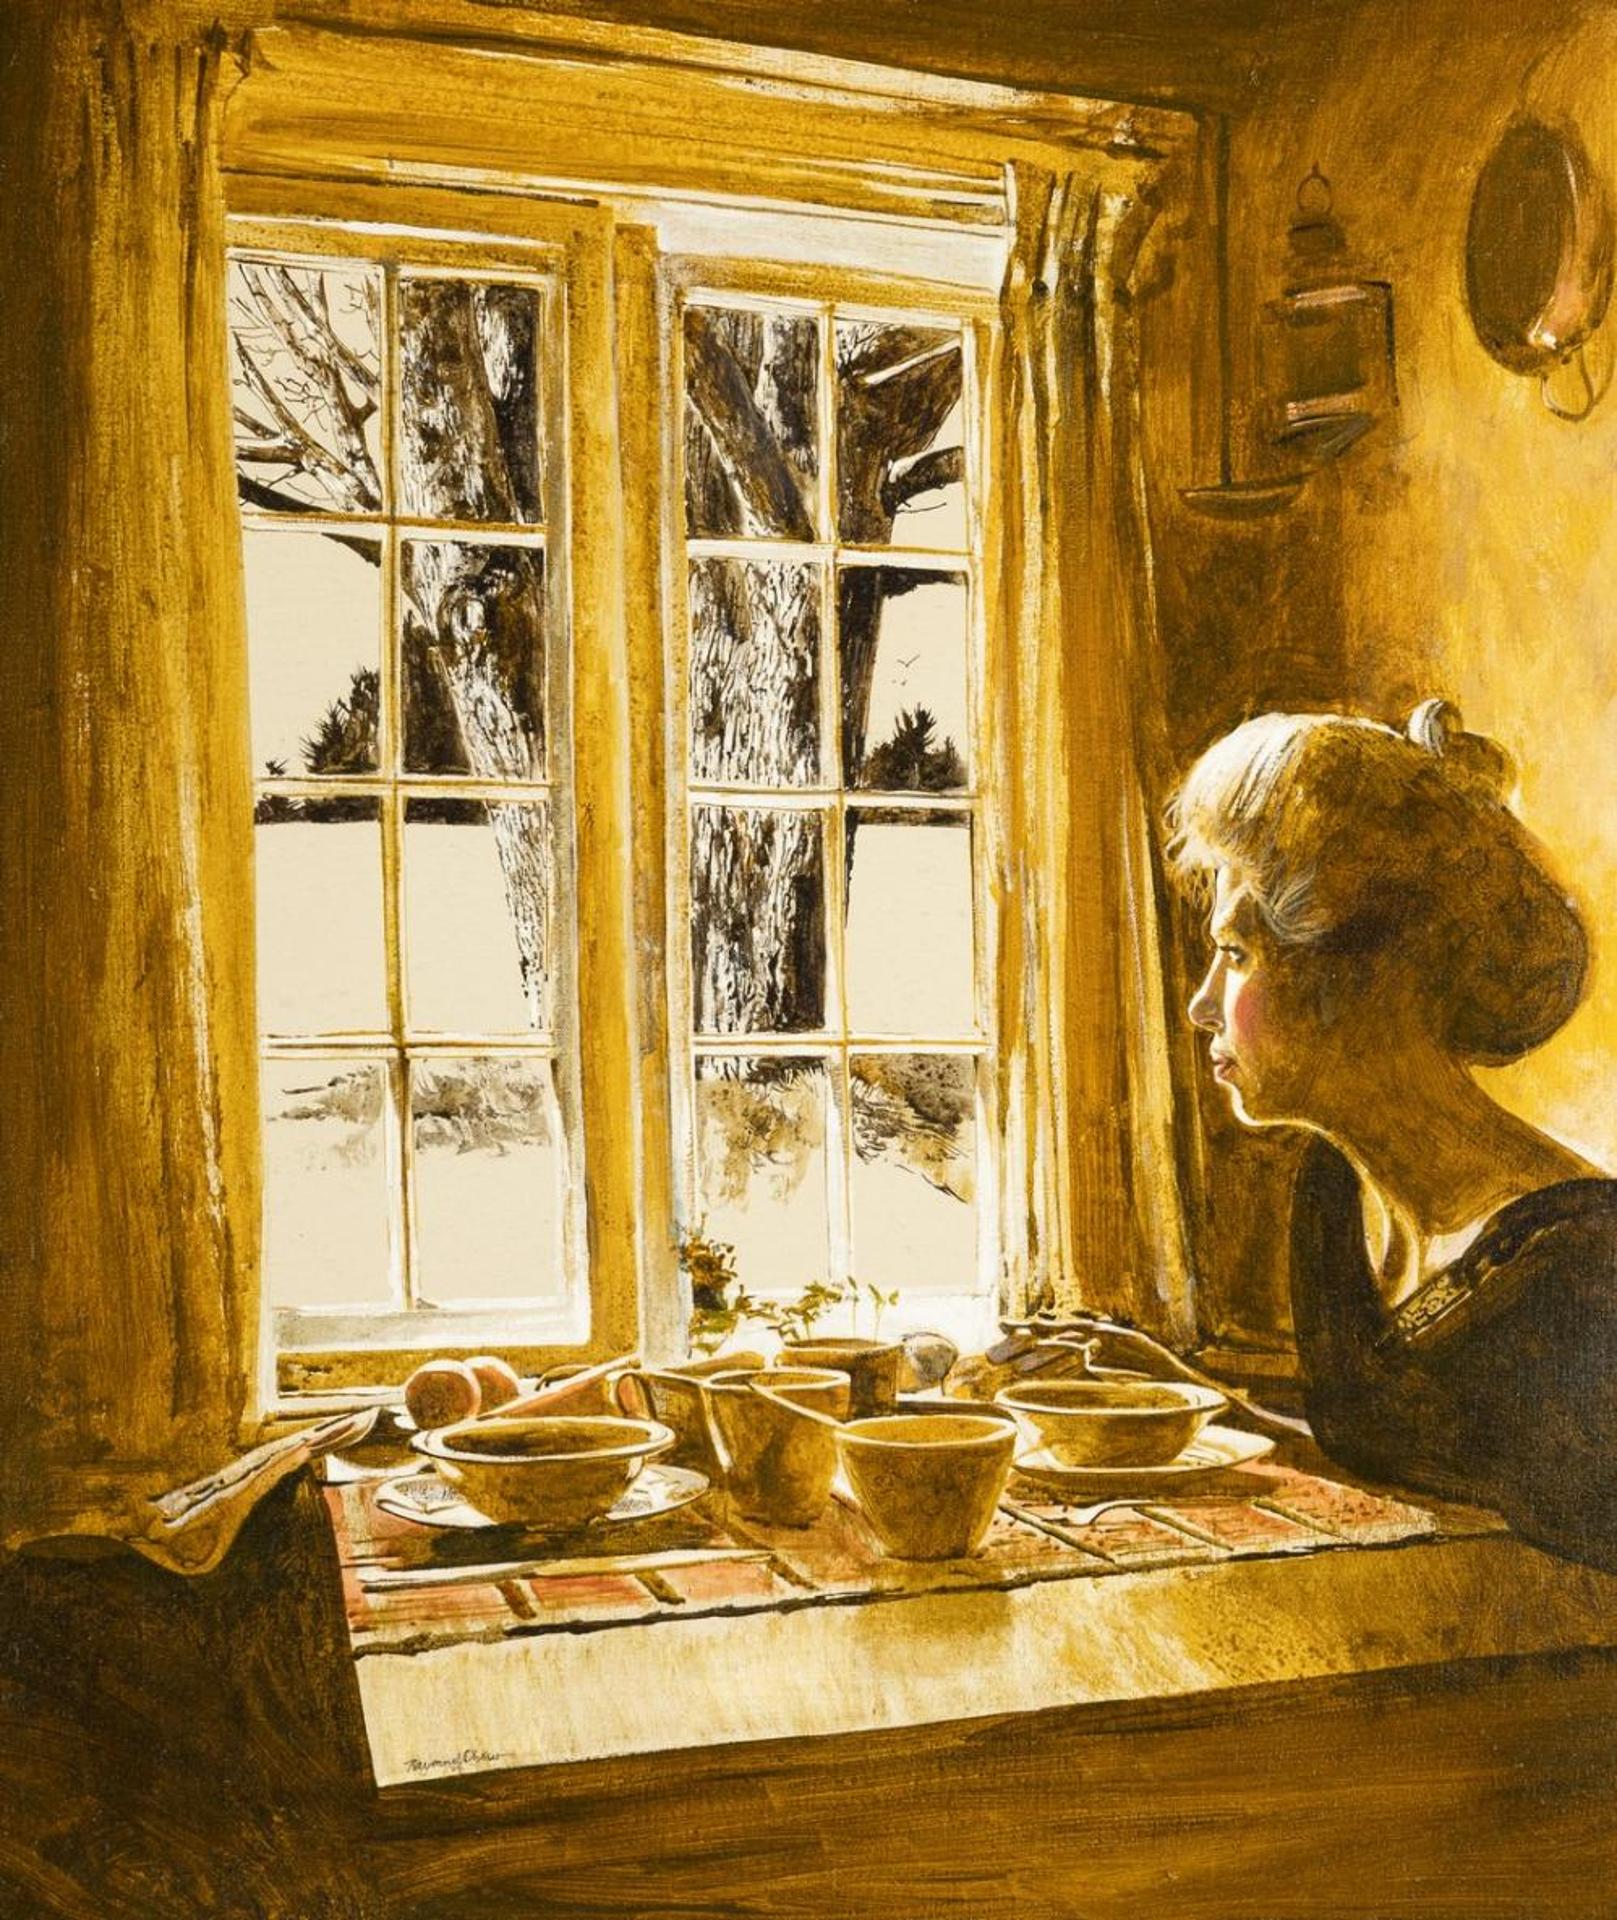 Raymond Chow (1941) - Looking Out the Window